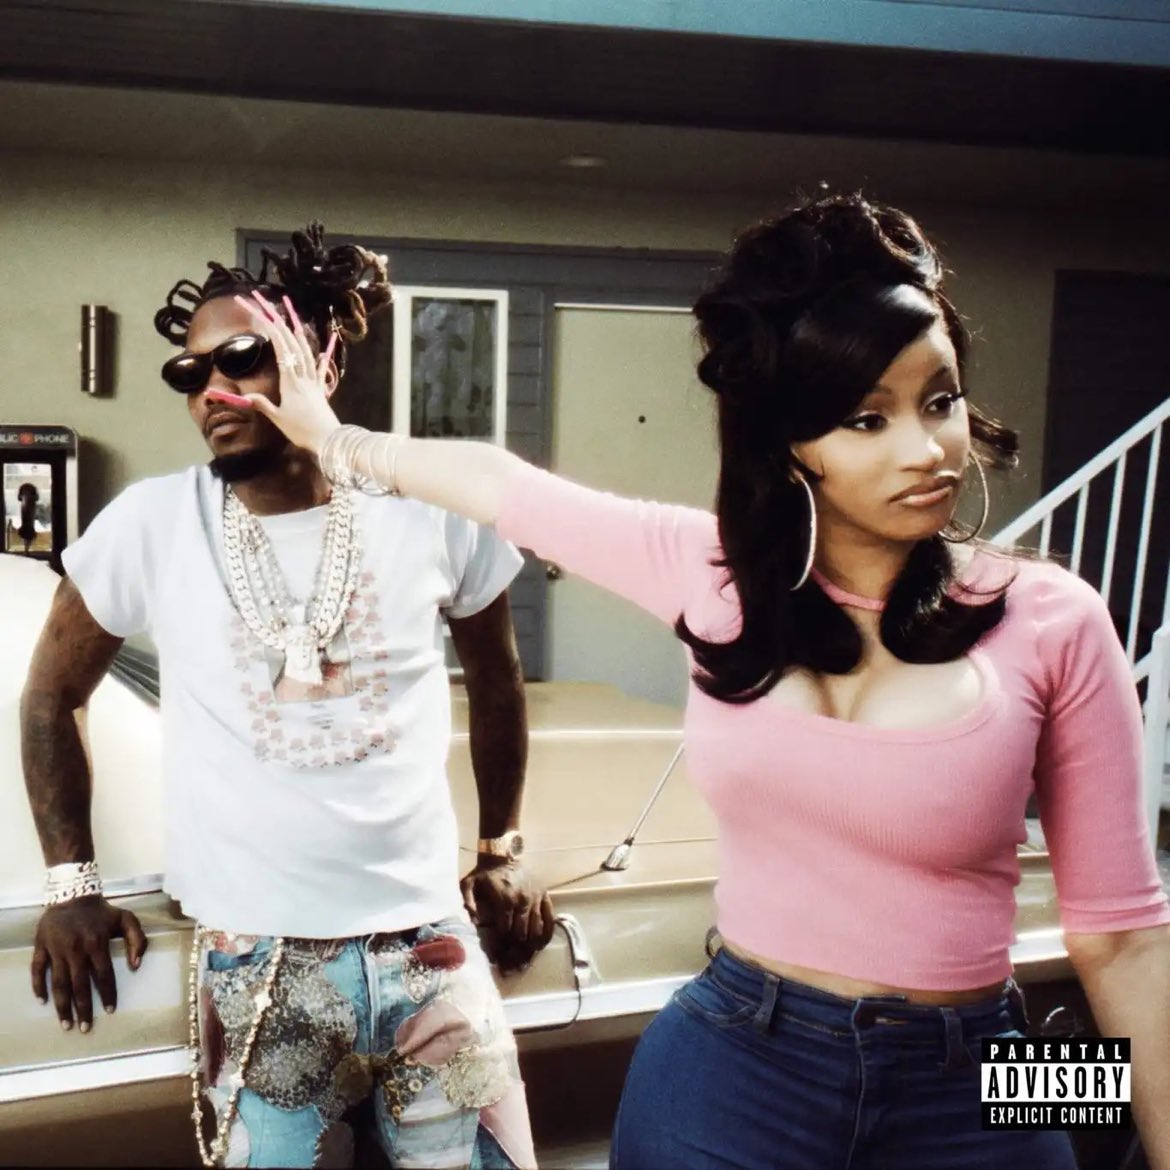 RT @PopBase: Offset announces new collaboration with Cardi B titled ‘Jealousy’ out this Friday. https://t.co/FvTPgtIzpb